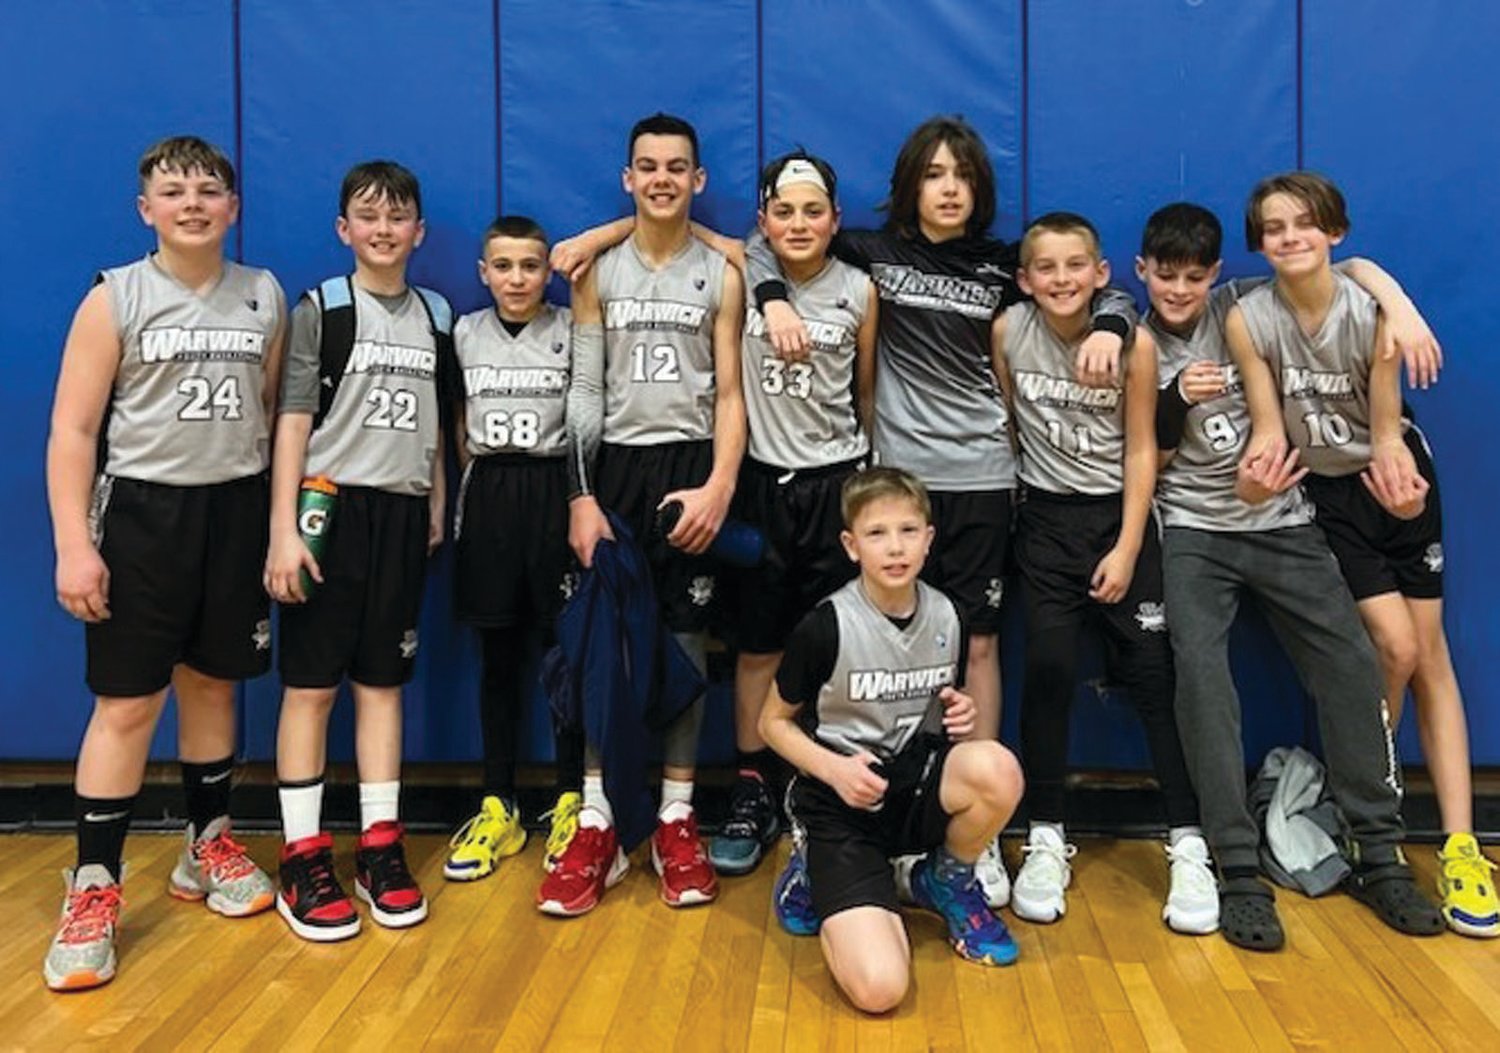 STATE CHAMPS: The PAL 6th grade B team which included, from left to right: Grant Holbrook, Jacob Rush, Christian Benevides, Jacoby Joyce, Enzo Gianfrancesco, Max Andersen, Christopher Aiello, Stephen Hawes, Joey Costa, and (kneeling) David Ellingwood. (Submitted photos)